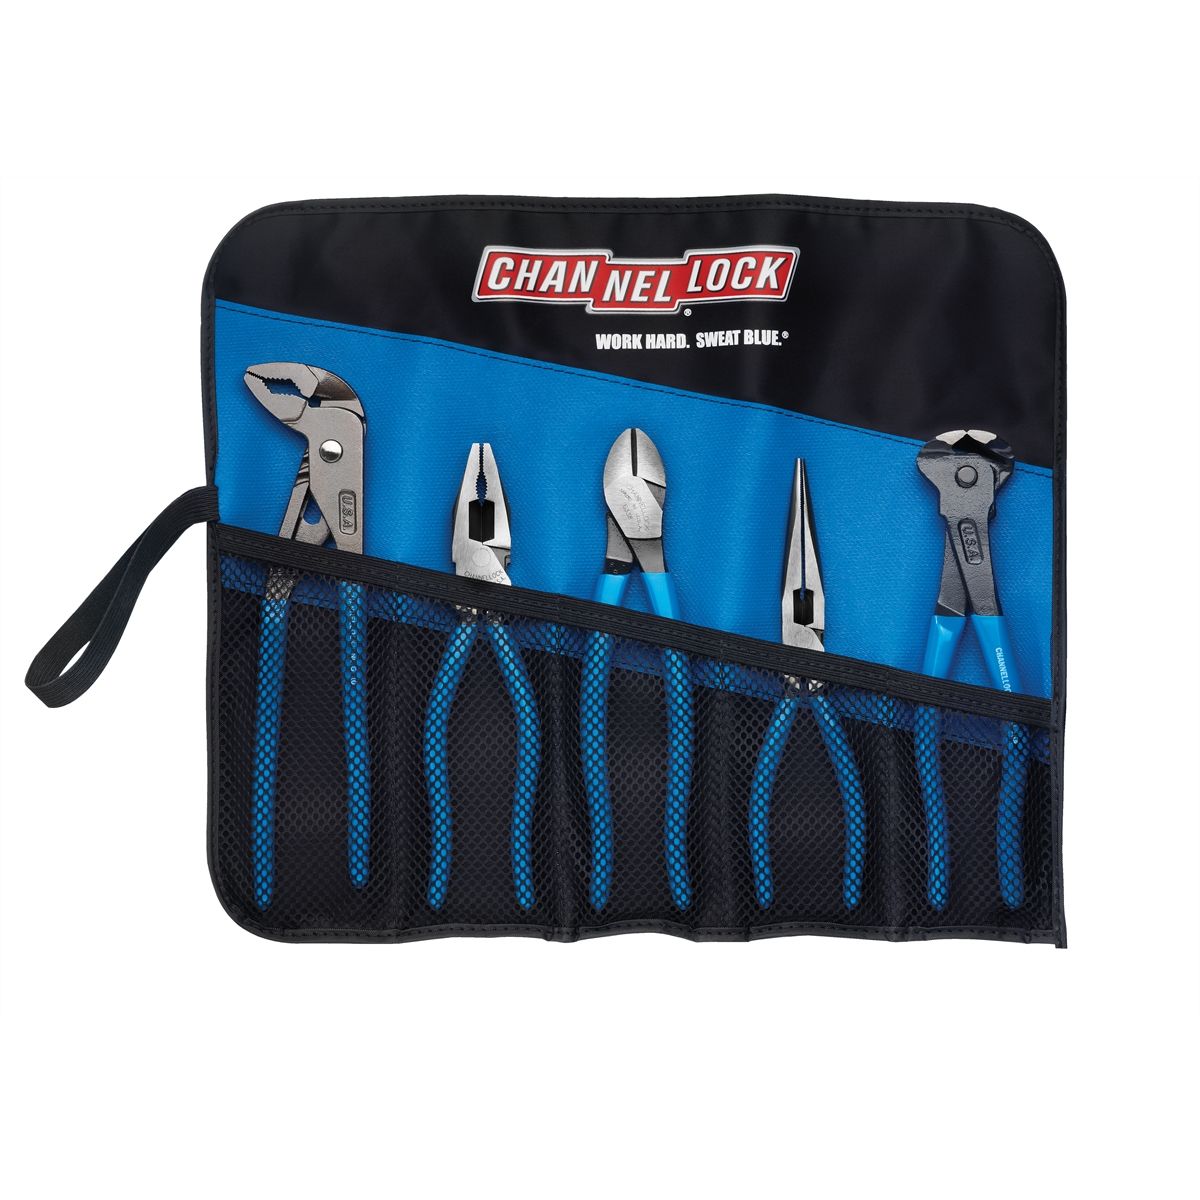 TOOL ROLL-5 5PC PROFESSIONAL TOOL SET WITH TOOL RO...